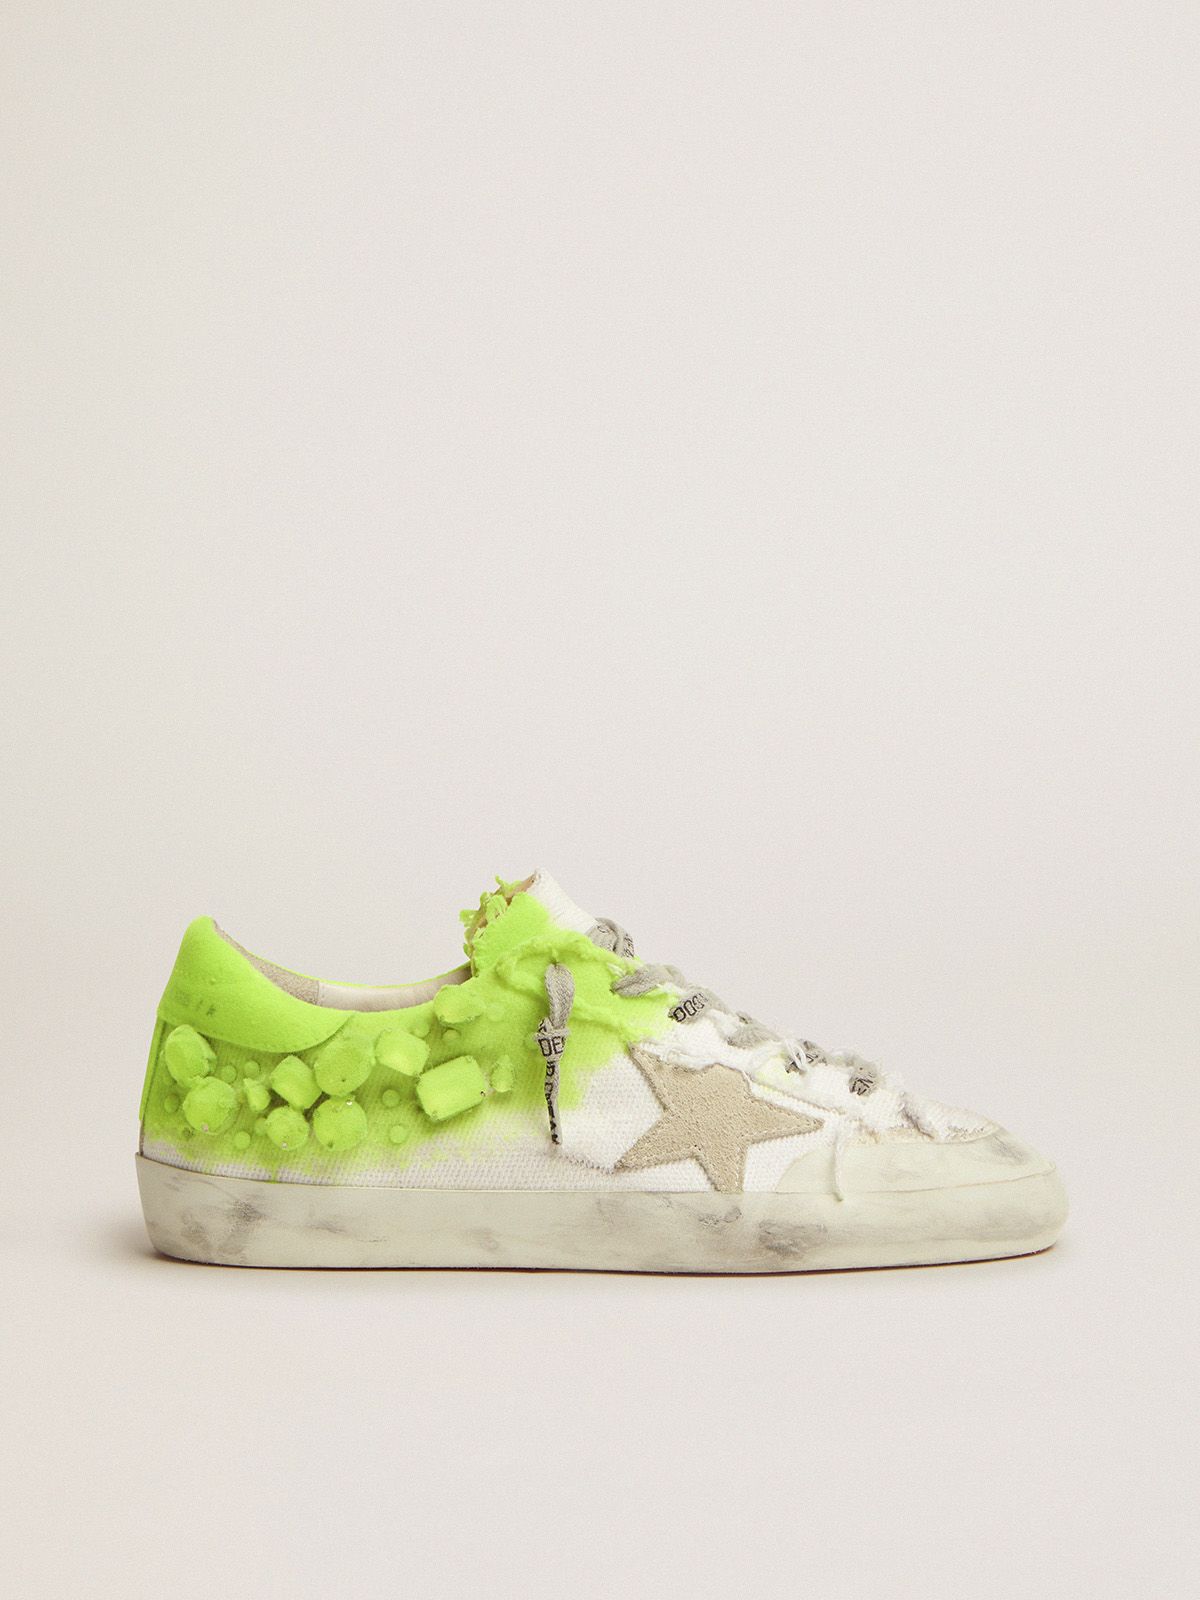 golden goose white with crystals fluorescent canvas Super-Star in paint sneakers yellow and flock